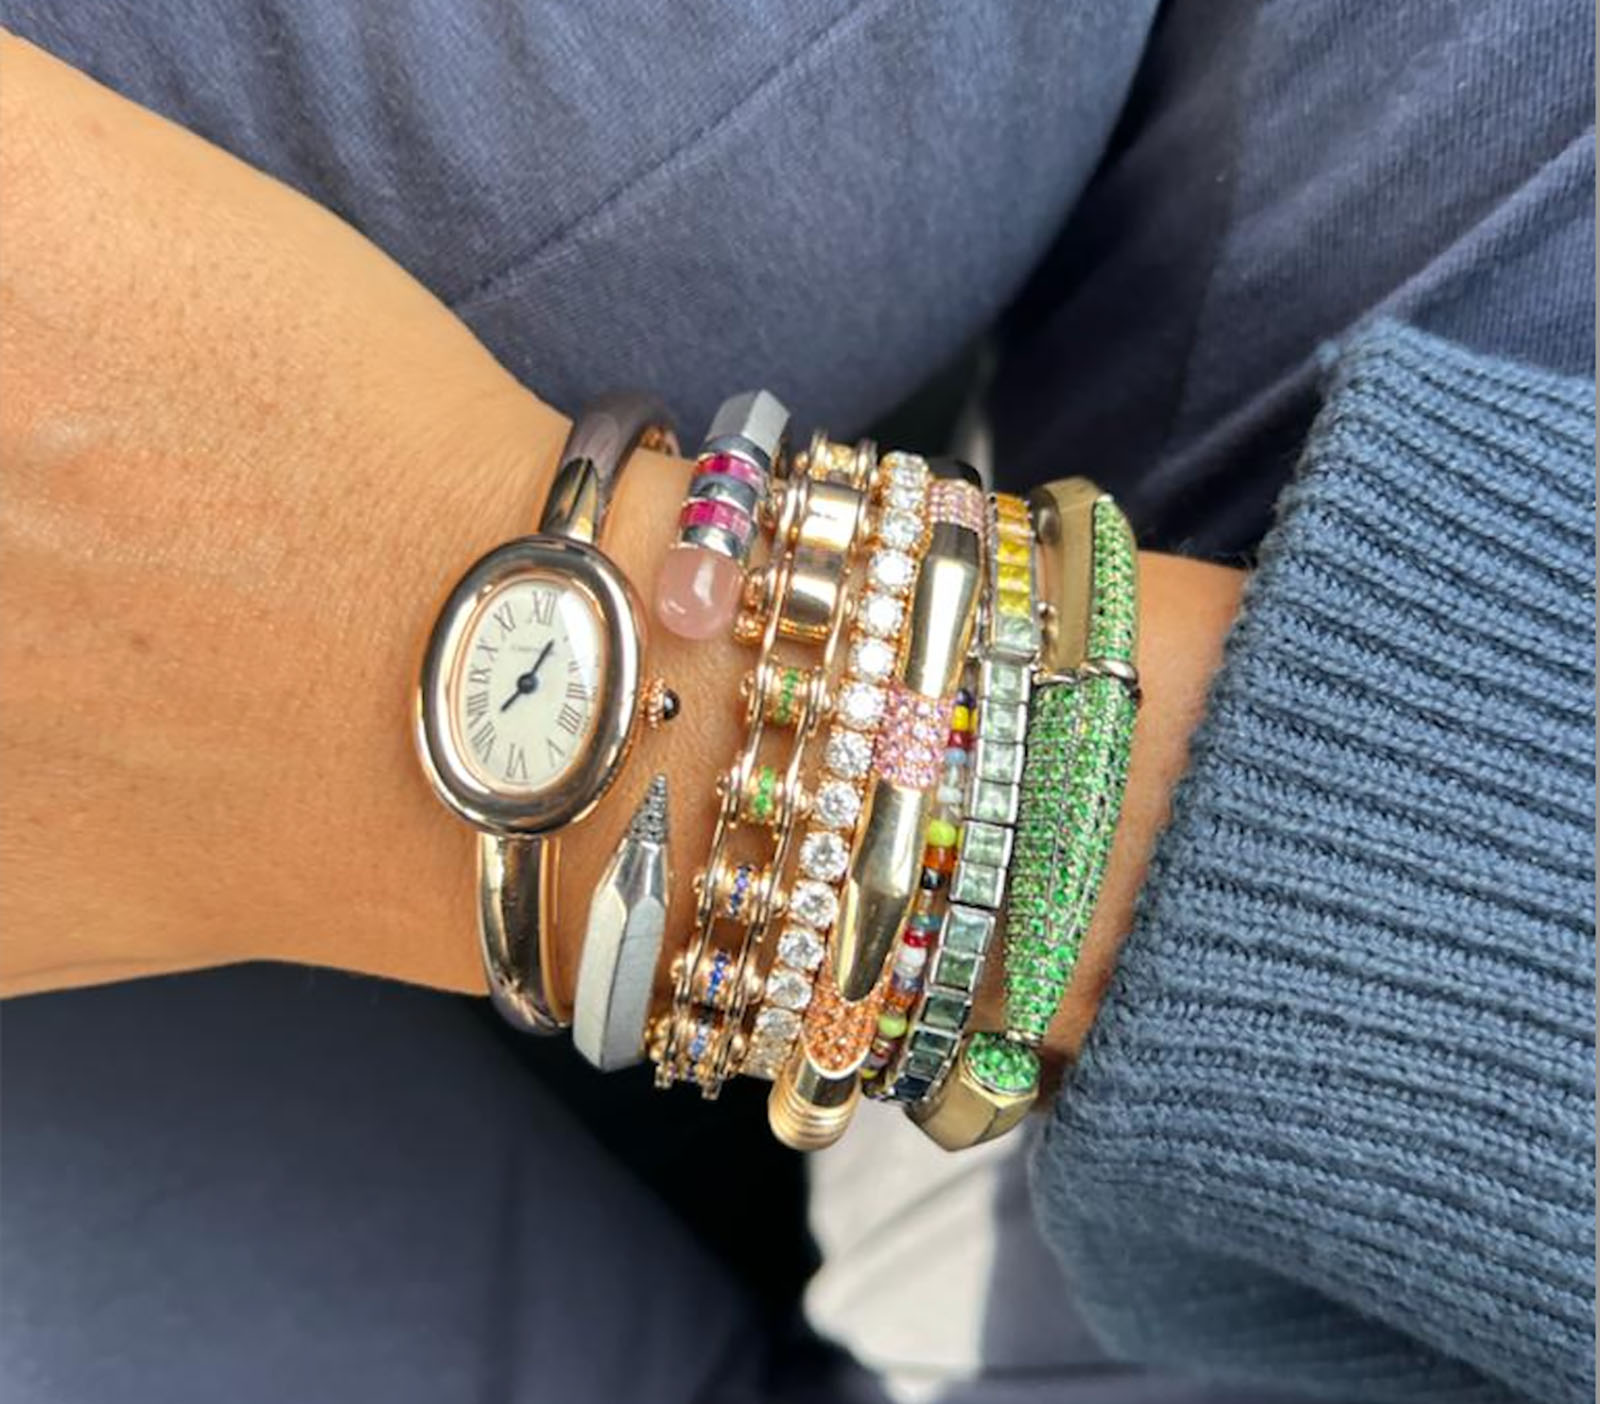 Matching Your Jewelry To Your Watch Is The New Fashion Trend